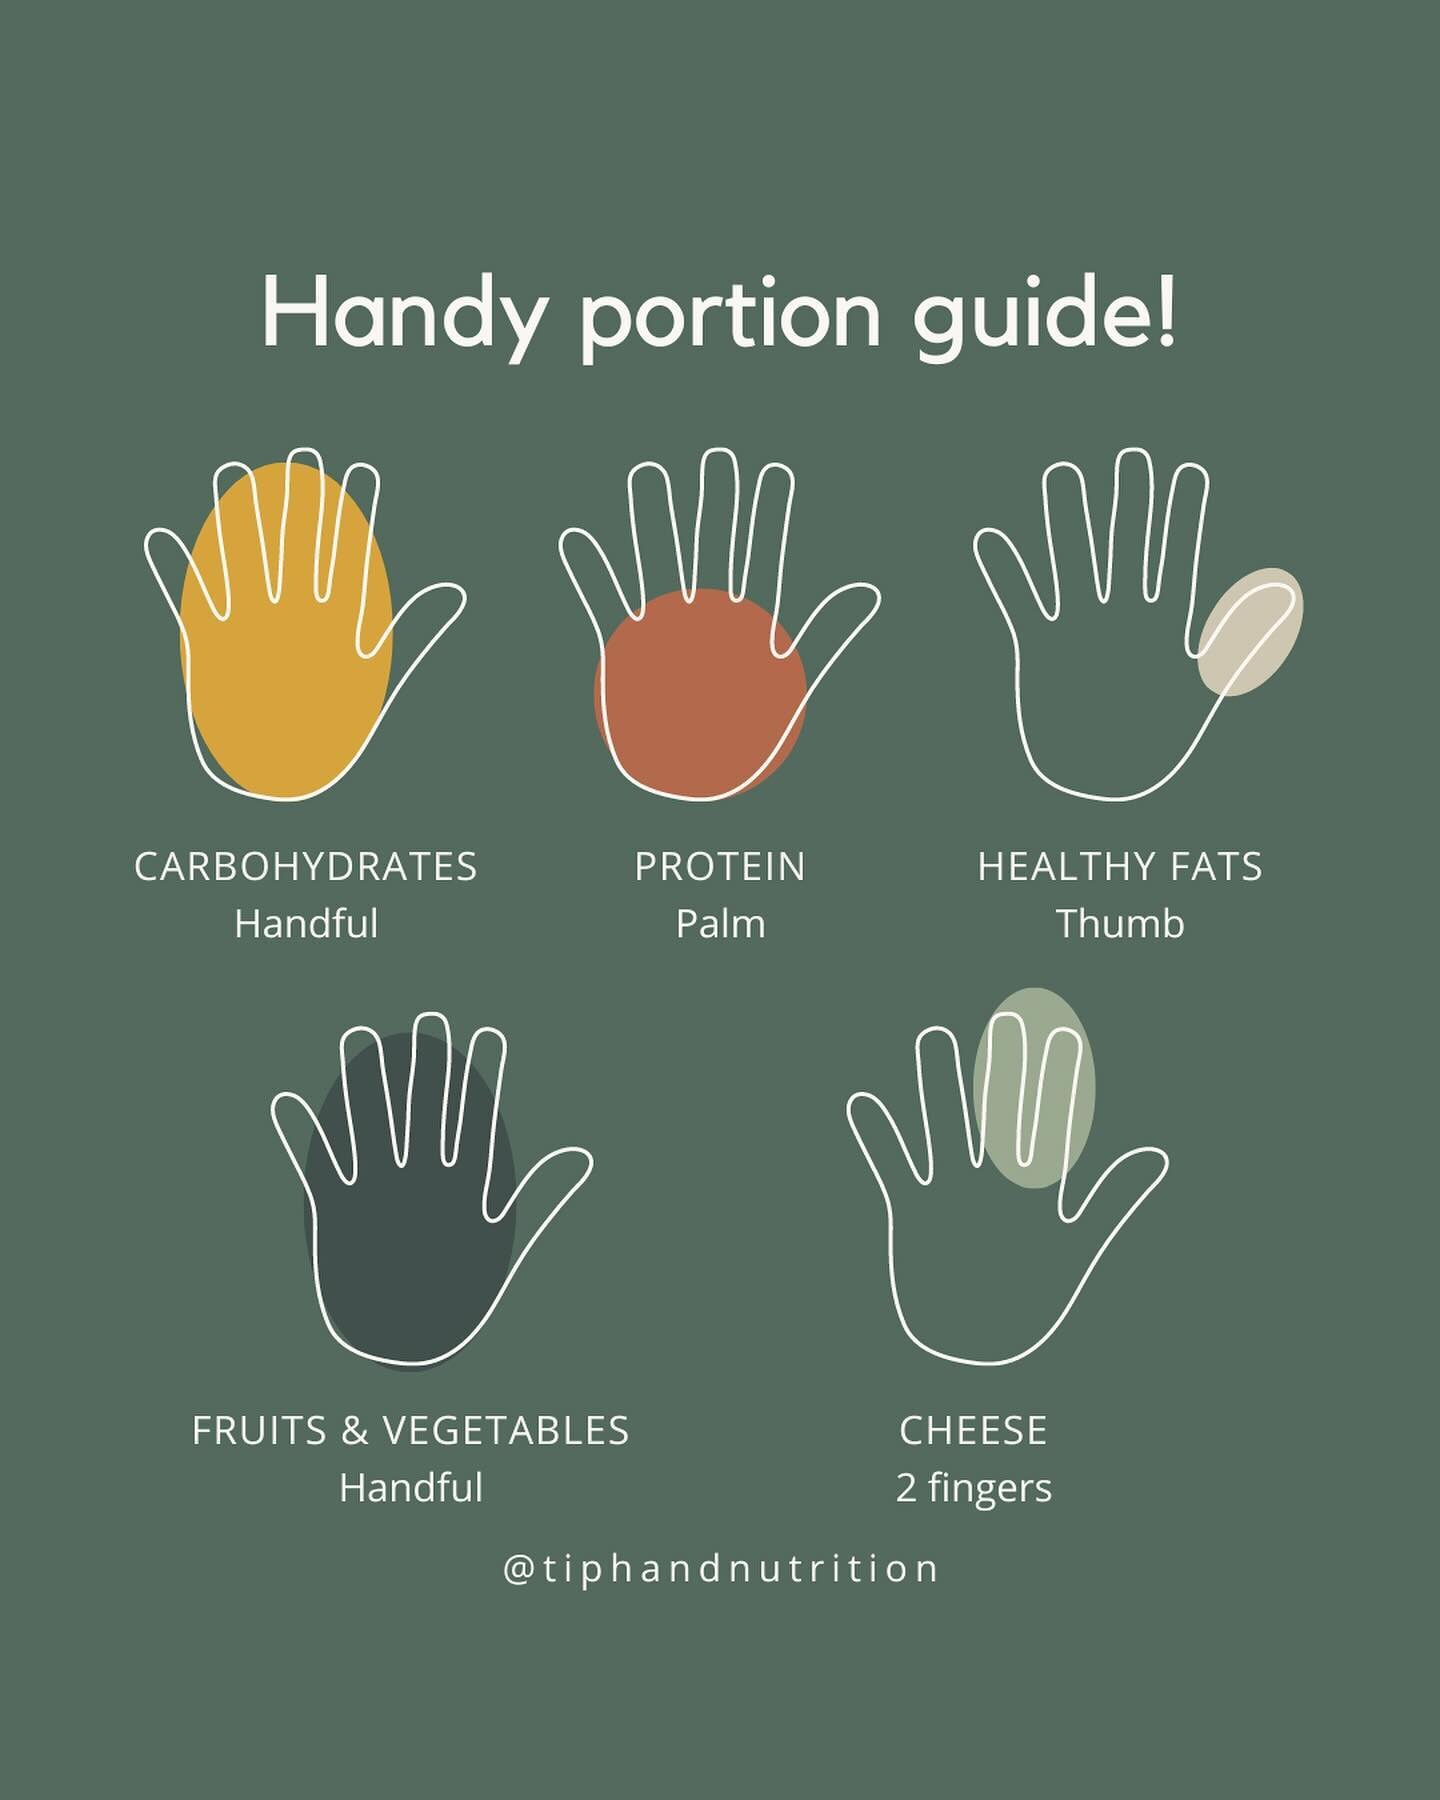 Portion guide 🙌✋👍

Someone mentioned how this is super useful (and I agree), so I&rsquo;m just popping it here again, it could come in handy (pun intended)! 

Double tap if you found this helpful! &hearts;️
SAVE this post so you can always refer ba